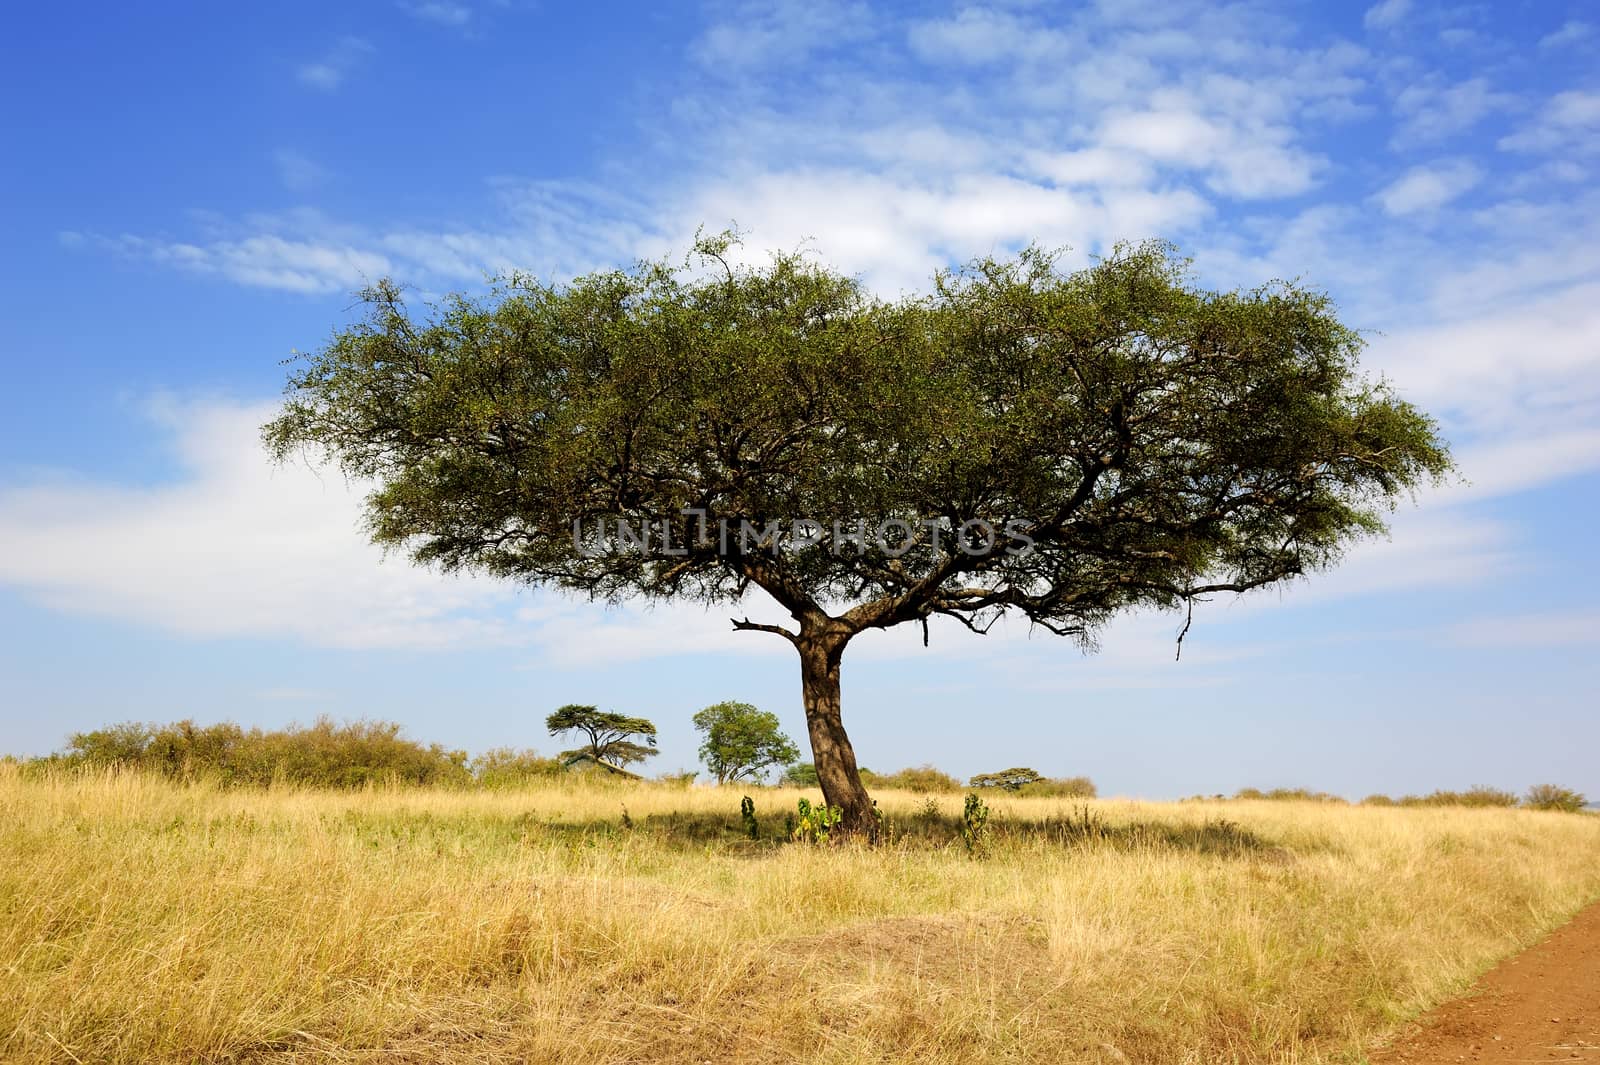 Landscape with tree in Africa by byrdyak